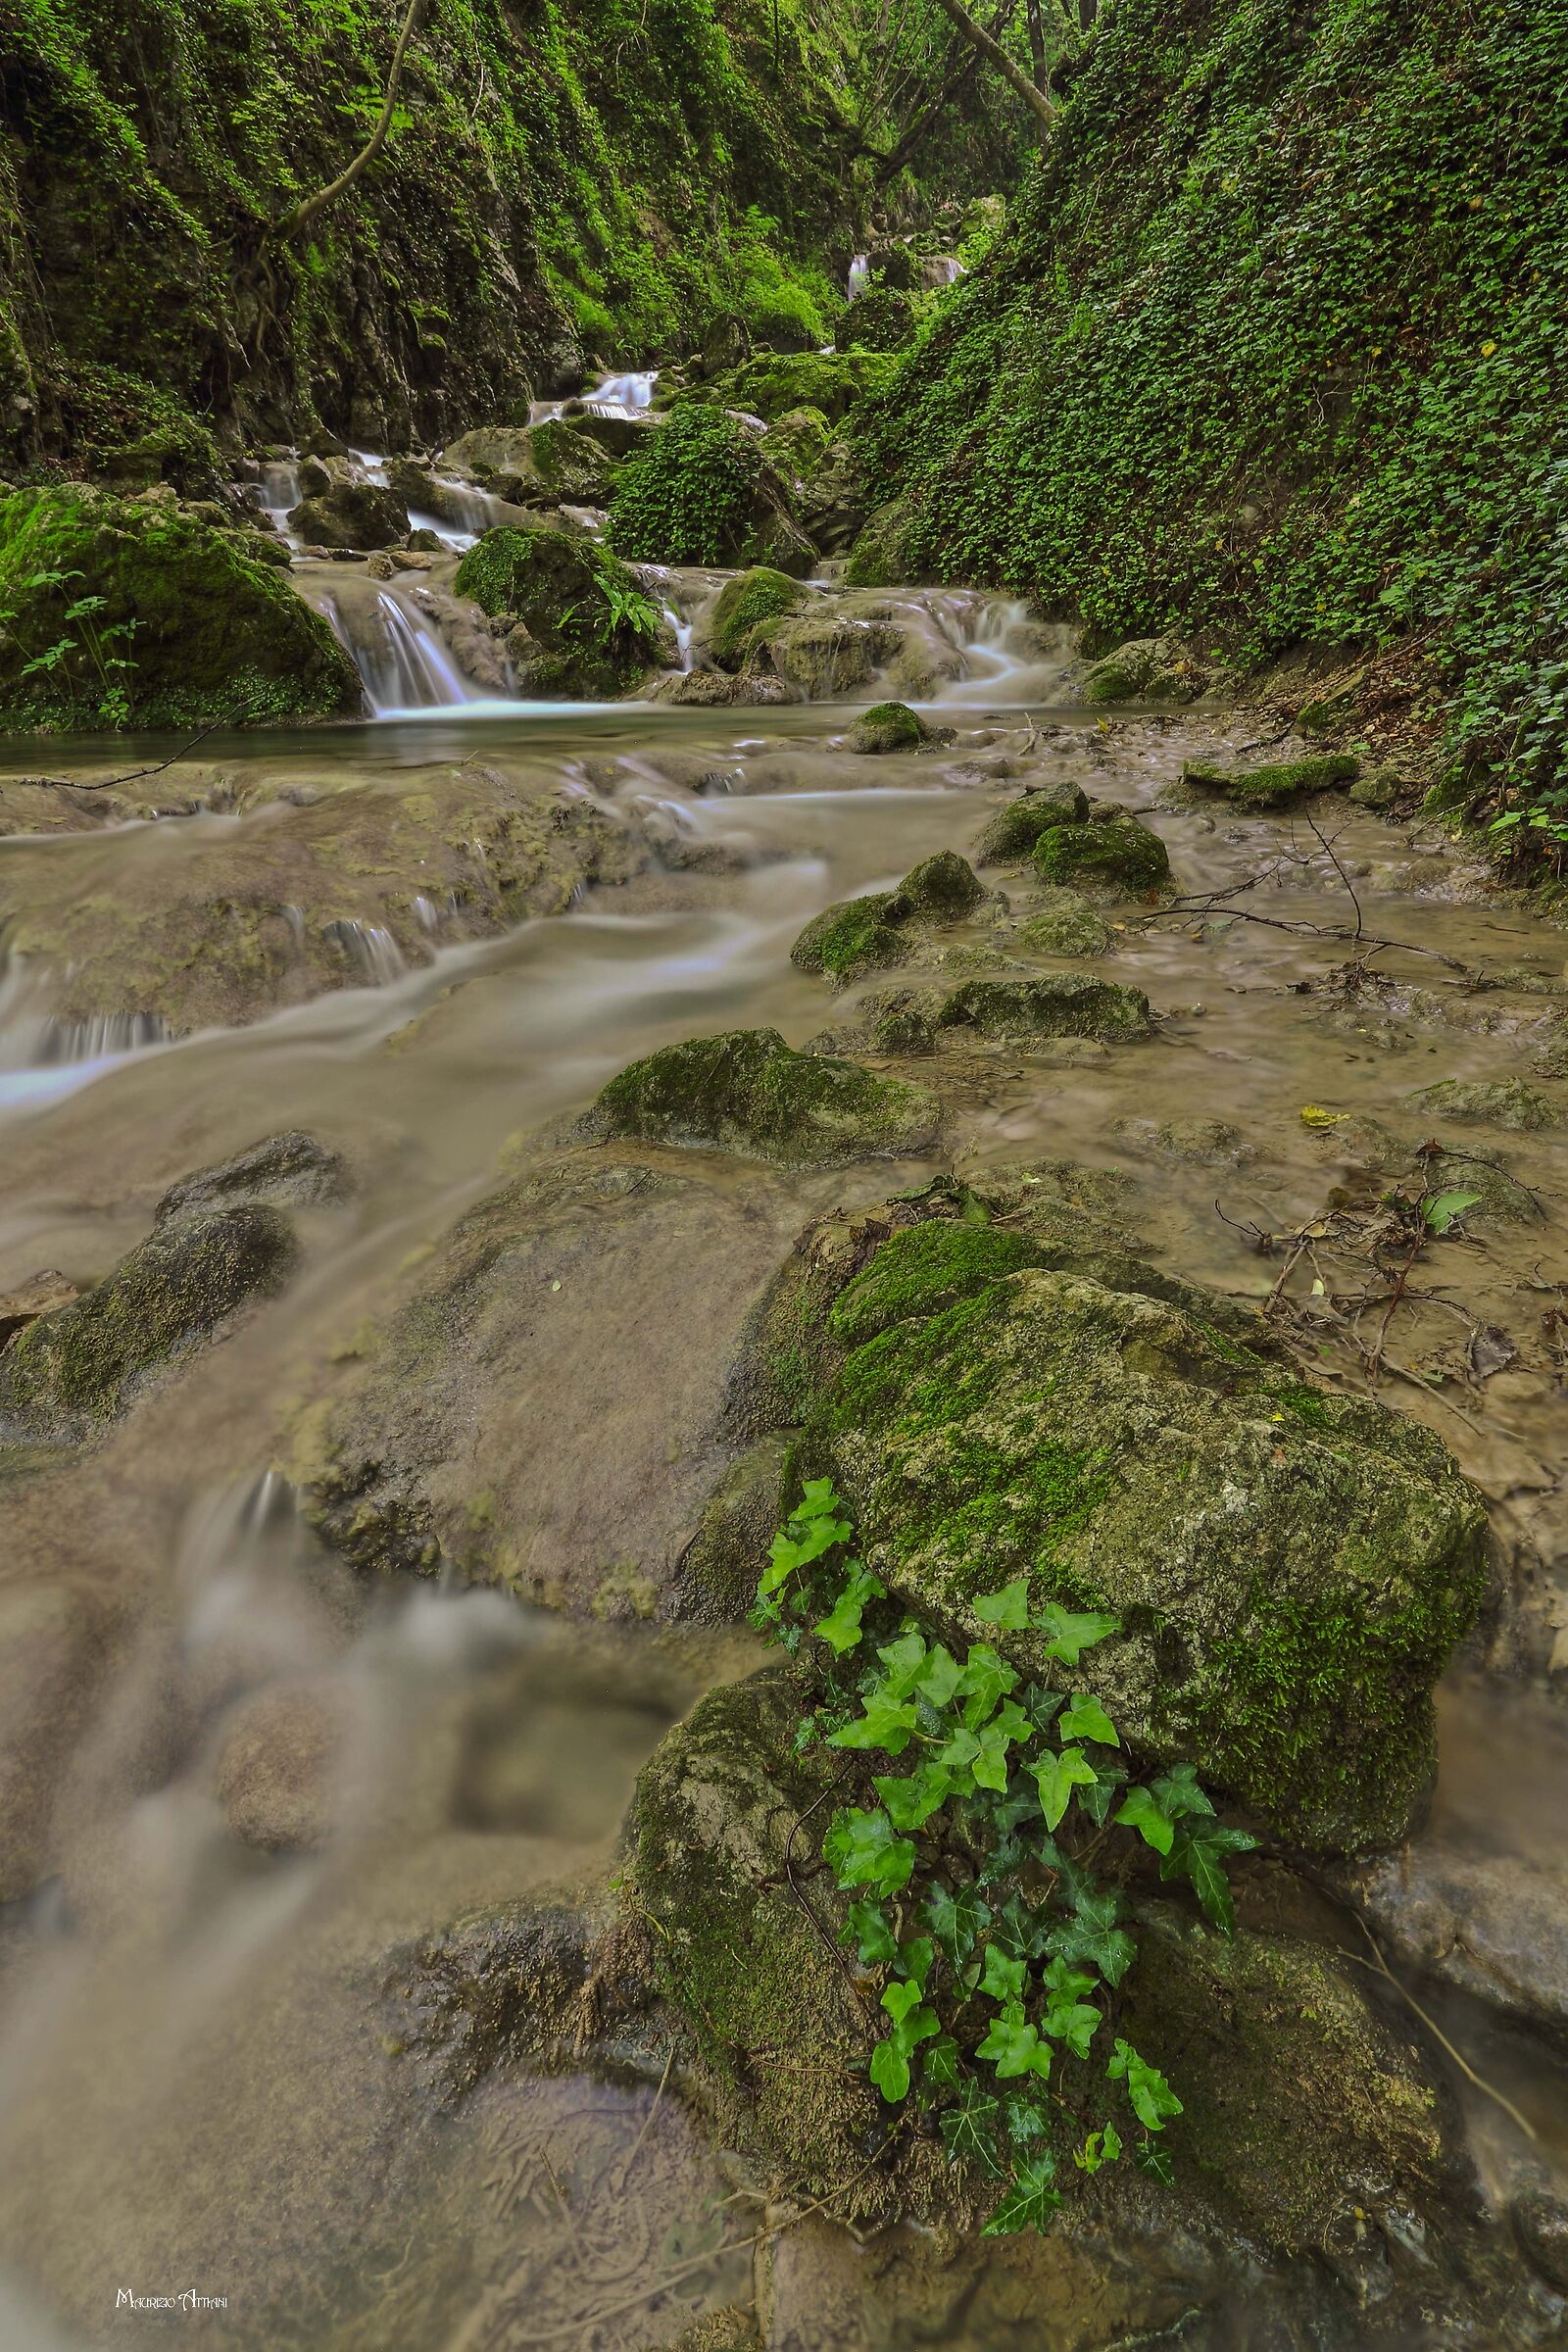 Along the Great Waterfall of Rio Scuro ...